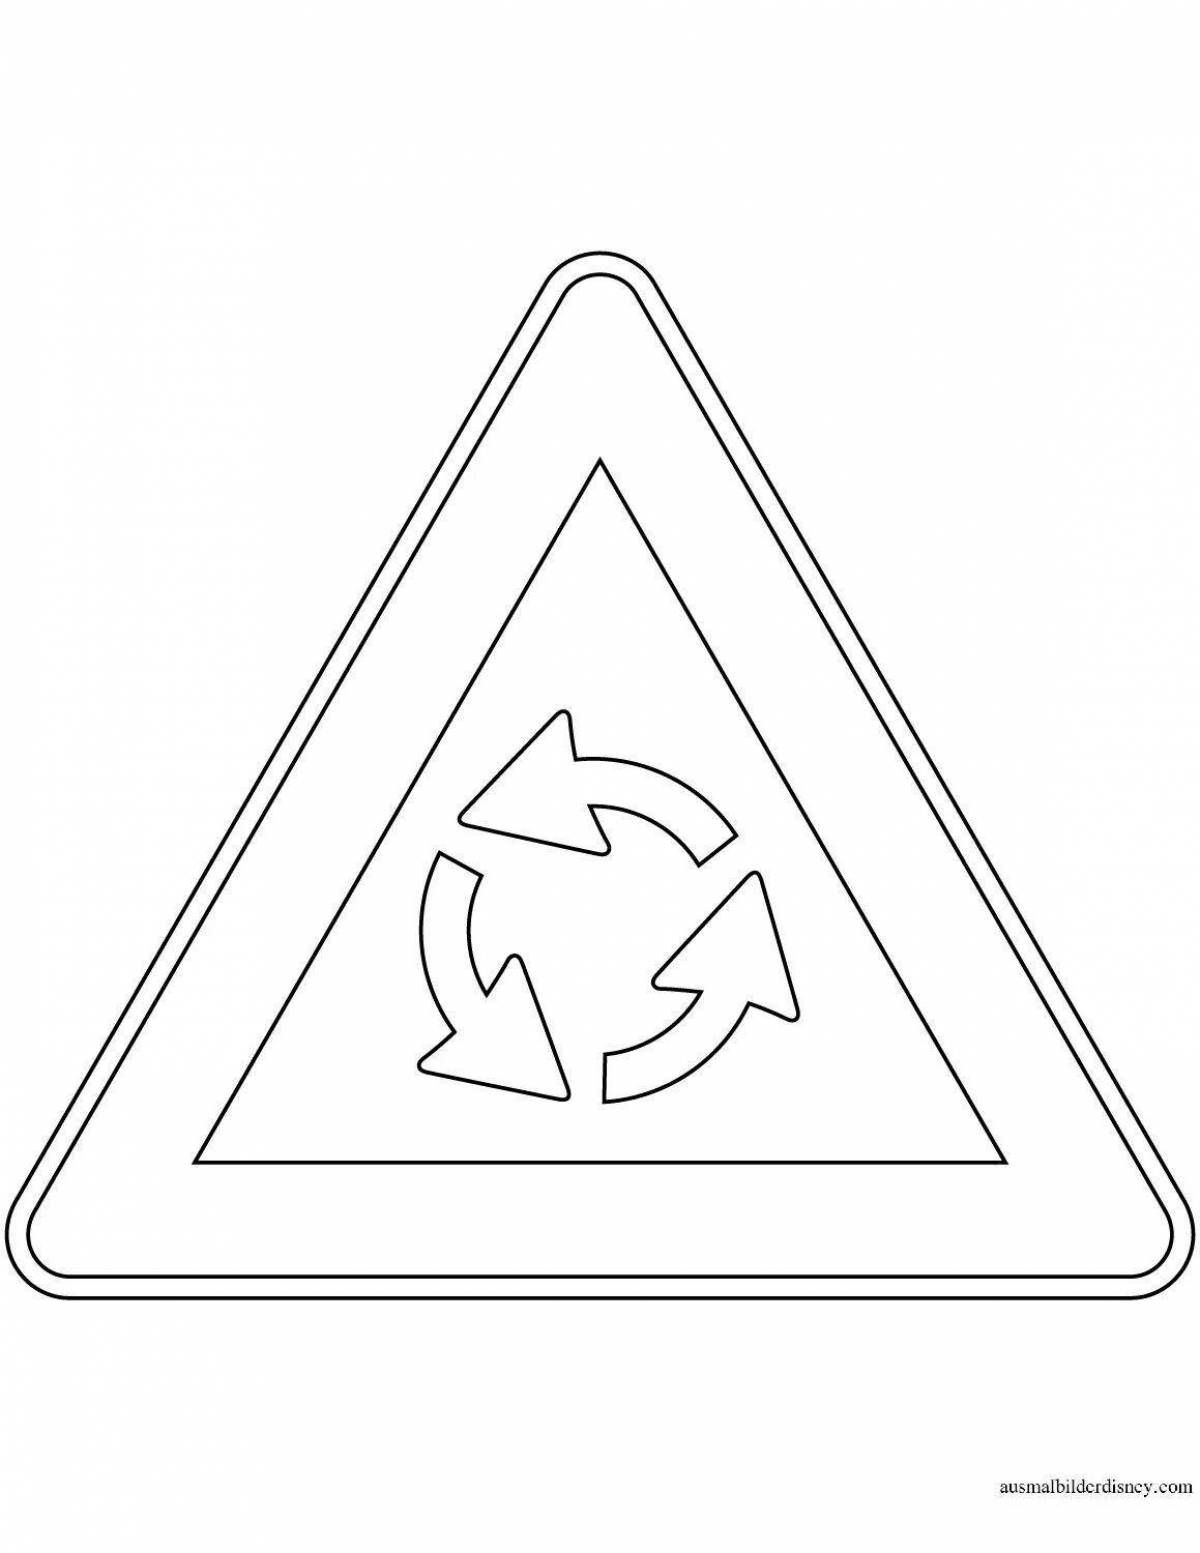 Safety sign coloring page